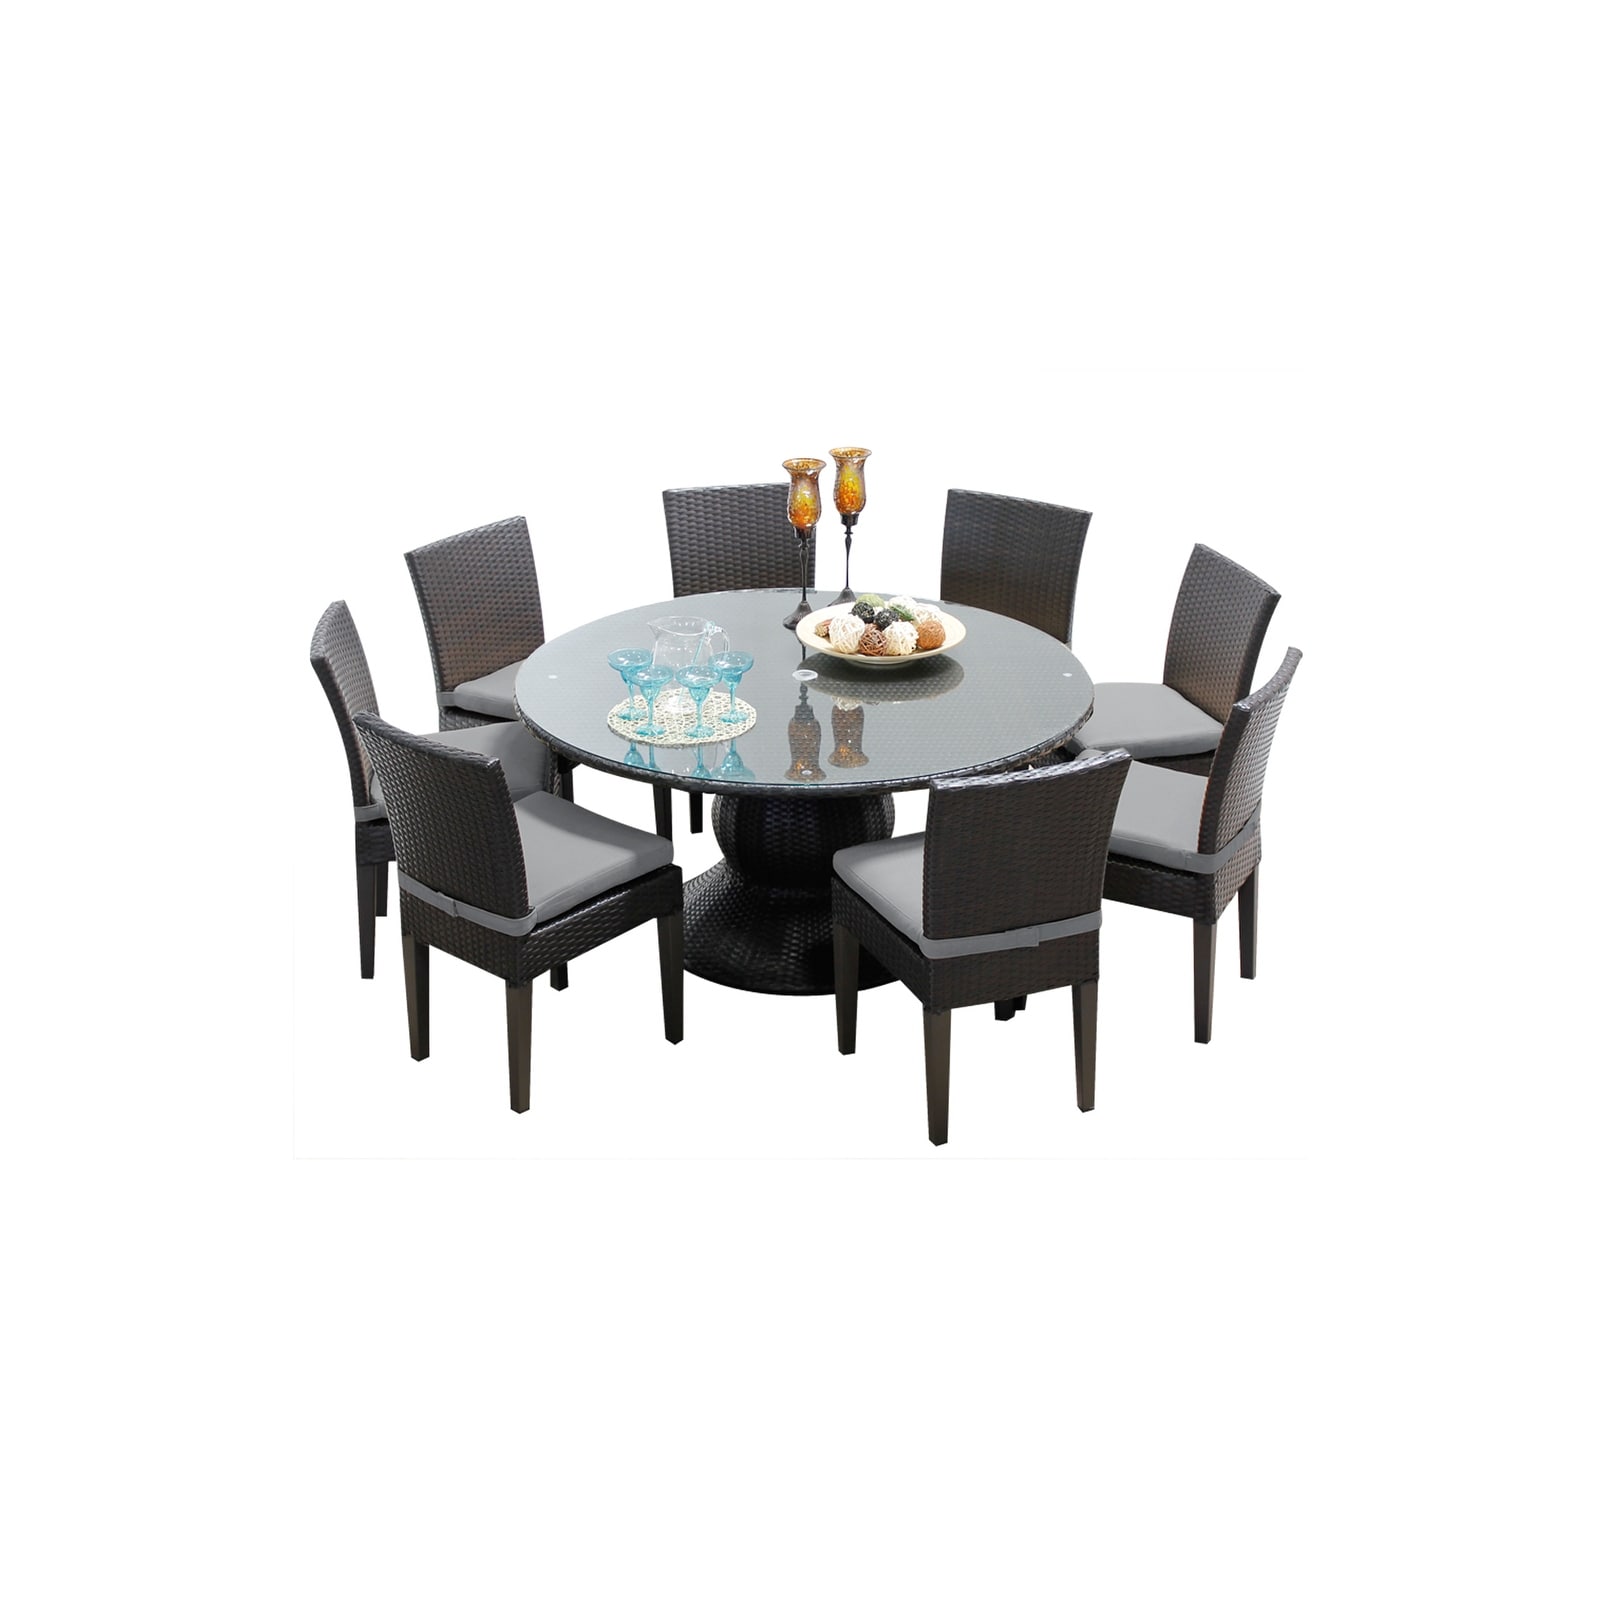 Napa 9 Piece Round Outdoor Patio Wicker Dining Set With Cushions